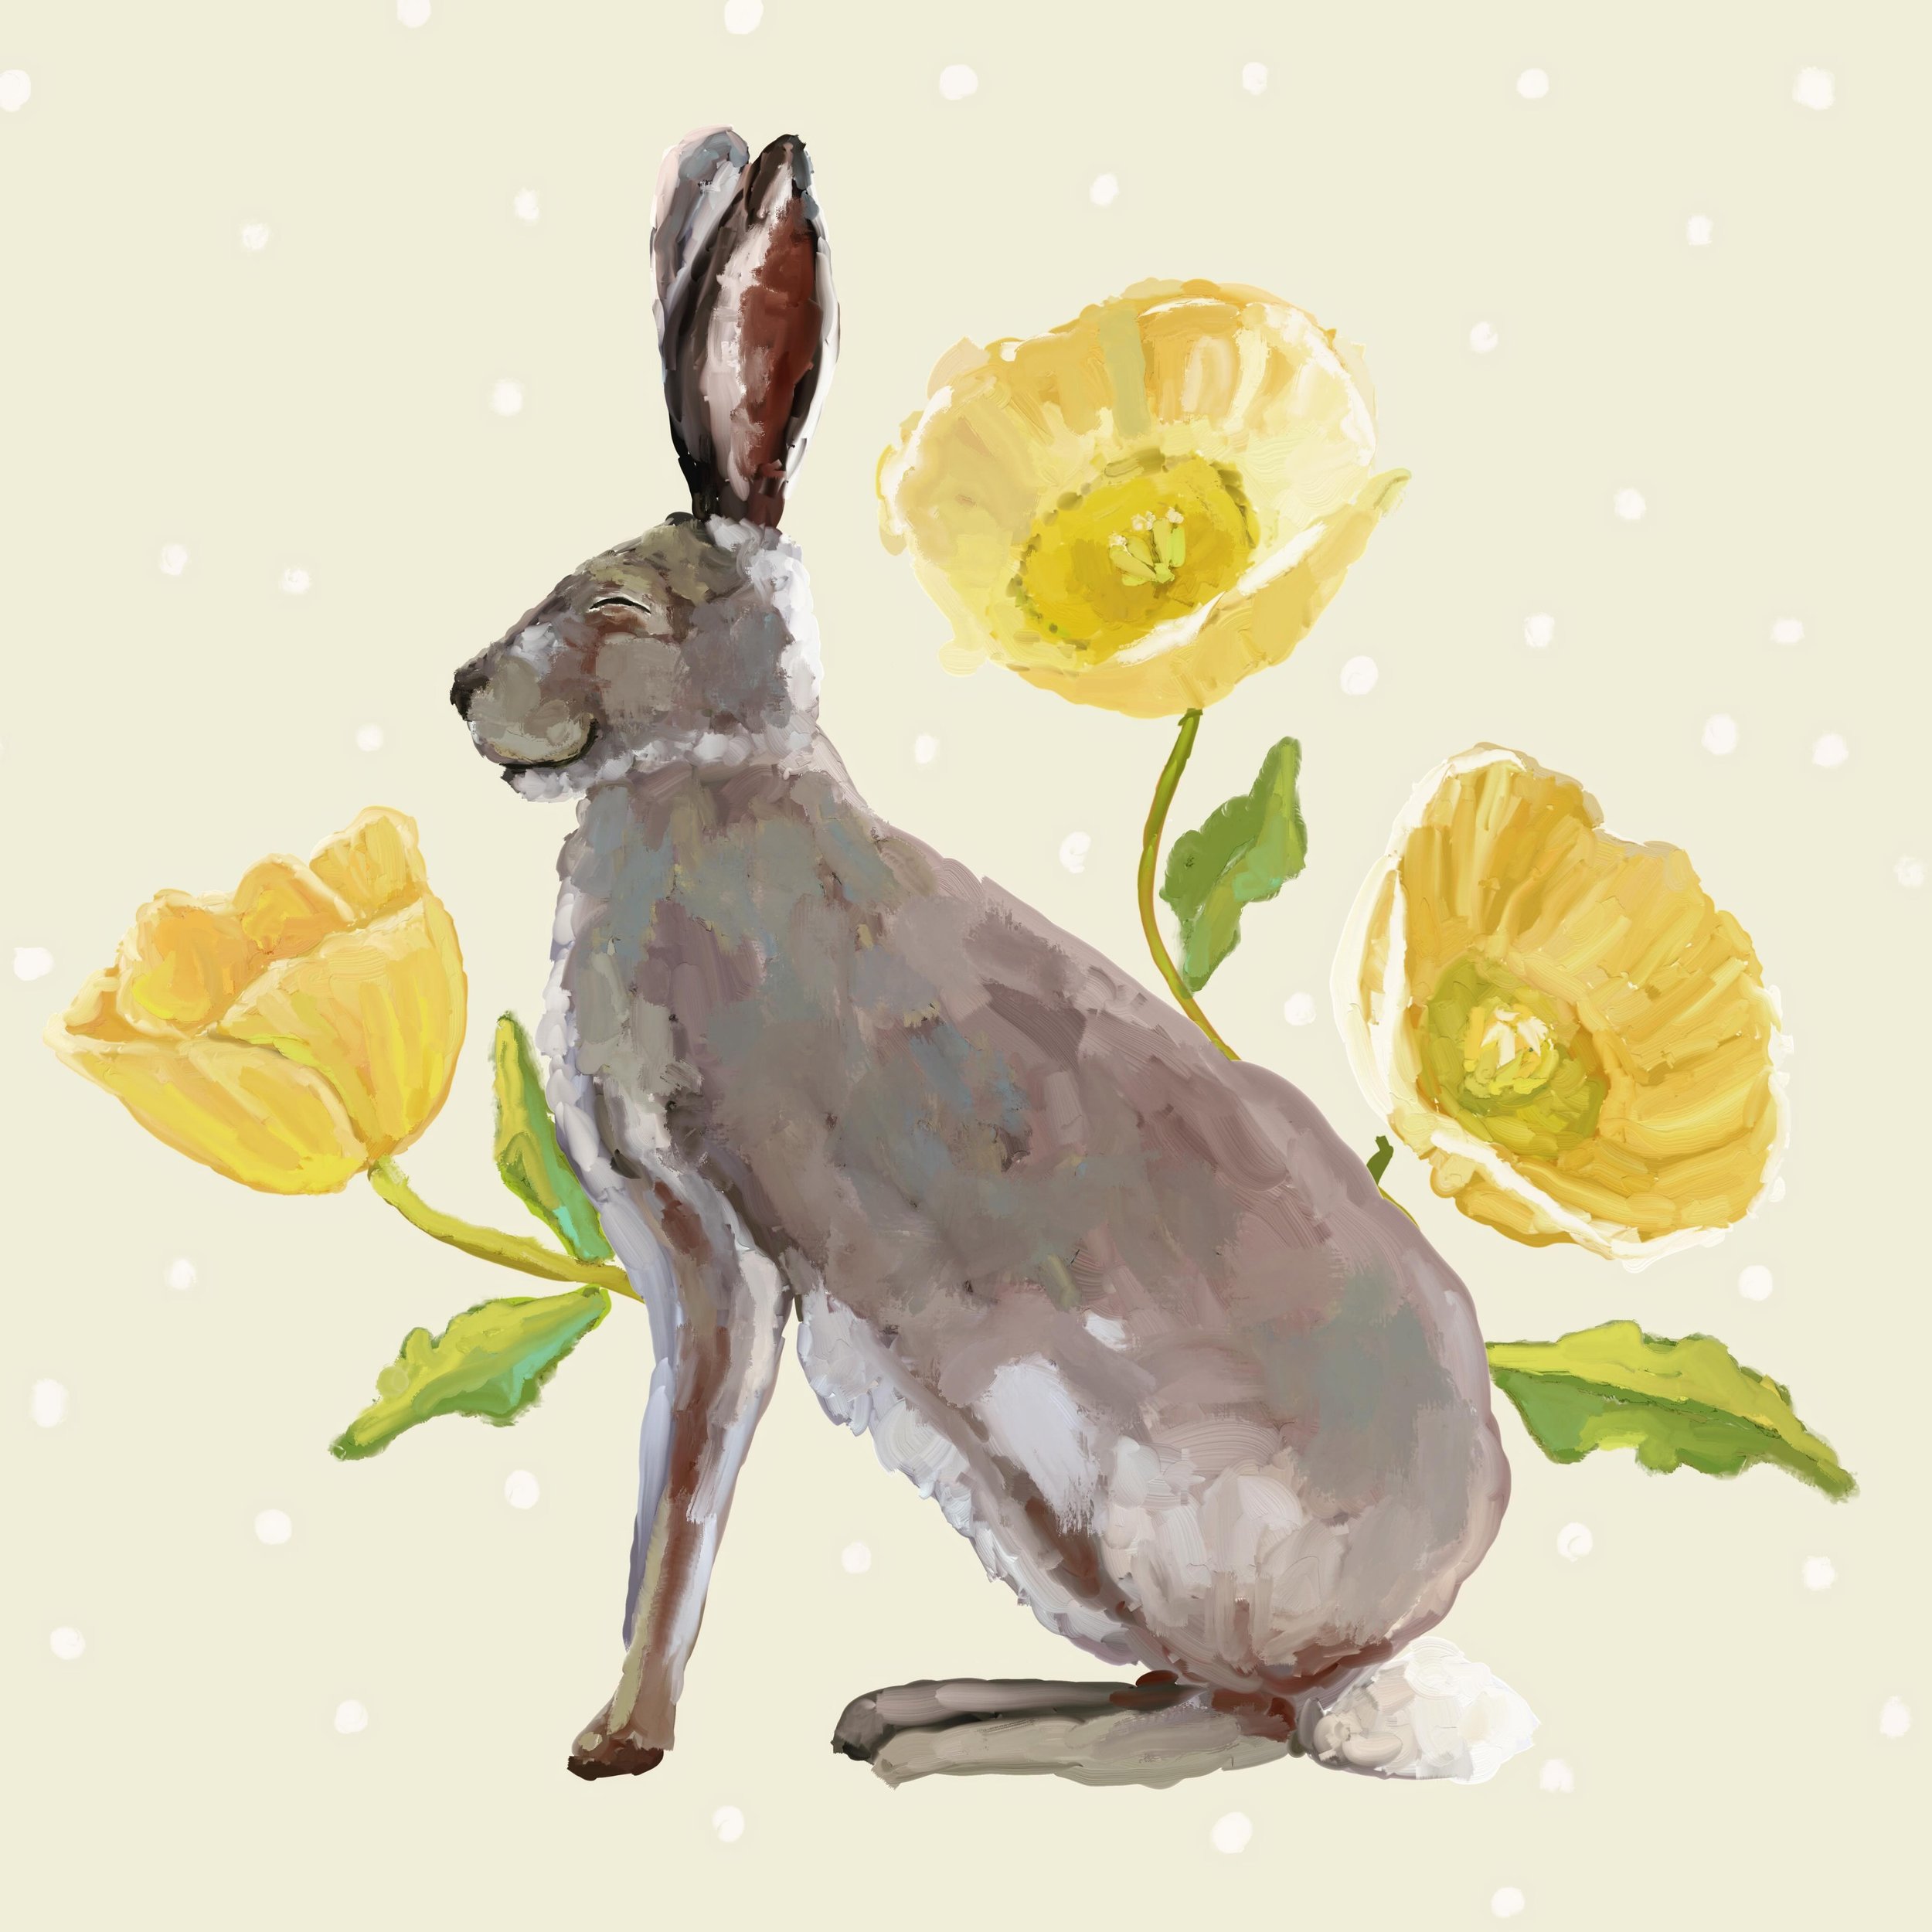 I&rsquo;ve been working so hard on patterns lately, it feels good to spend some time with woodland creatures. I think I could paint wild rabbits everyday. I love their proportions. 
.
.
#rabbit #illustration #illustratorsoninstagram #cathywalters #fl